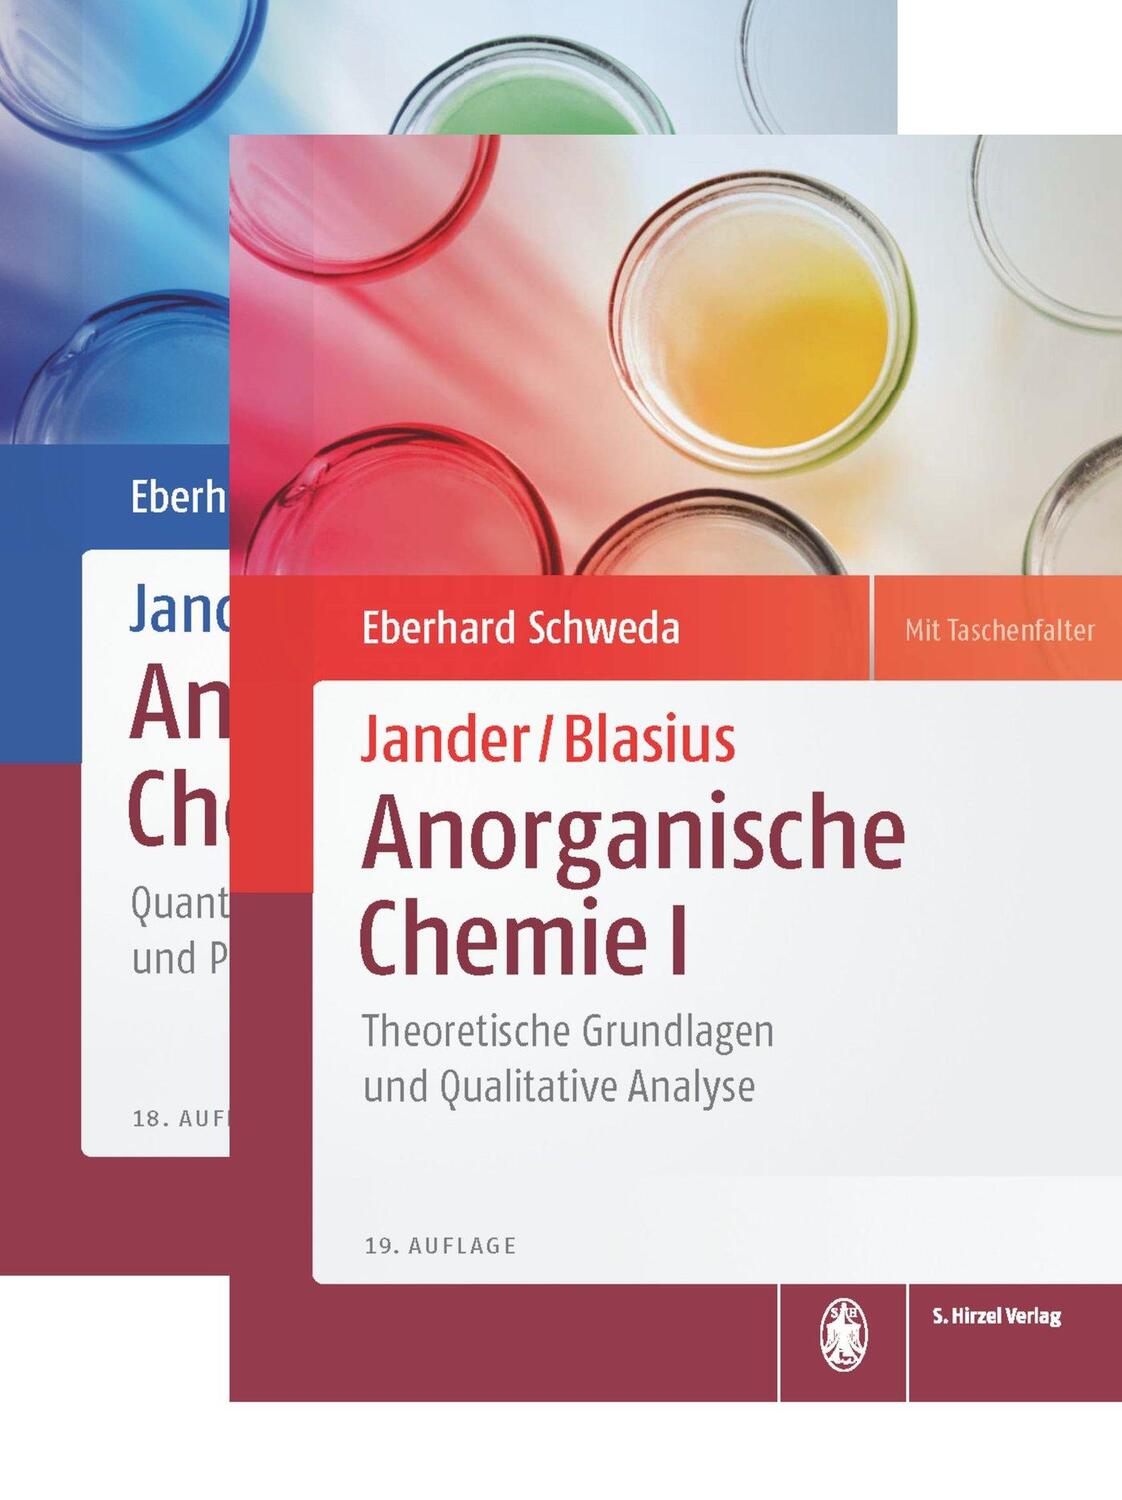 Cover: 9783777631868 | Package: Jander/Blasius, Anorganische Chemie I (19.A.) + II (18.A.)